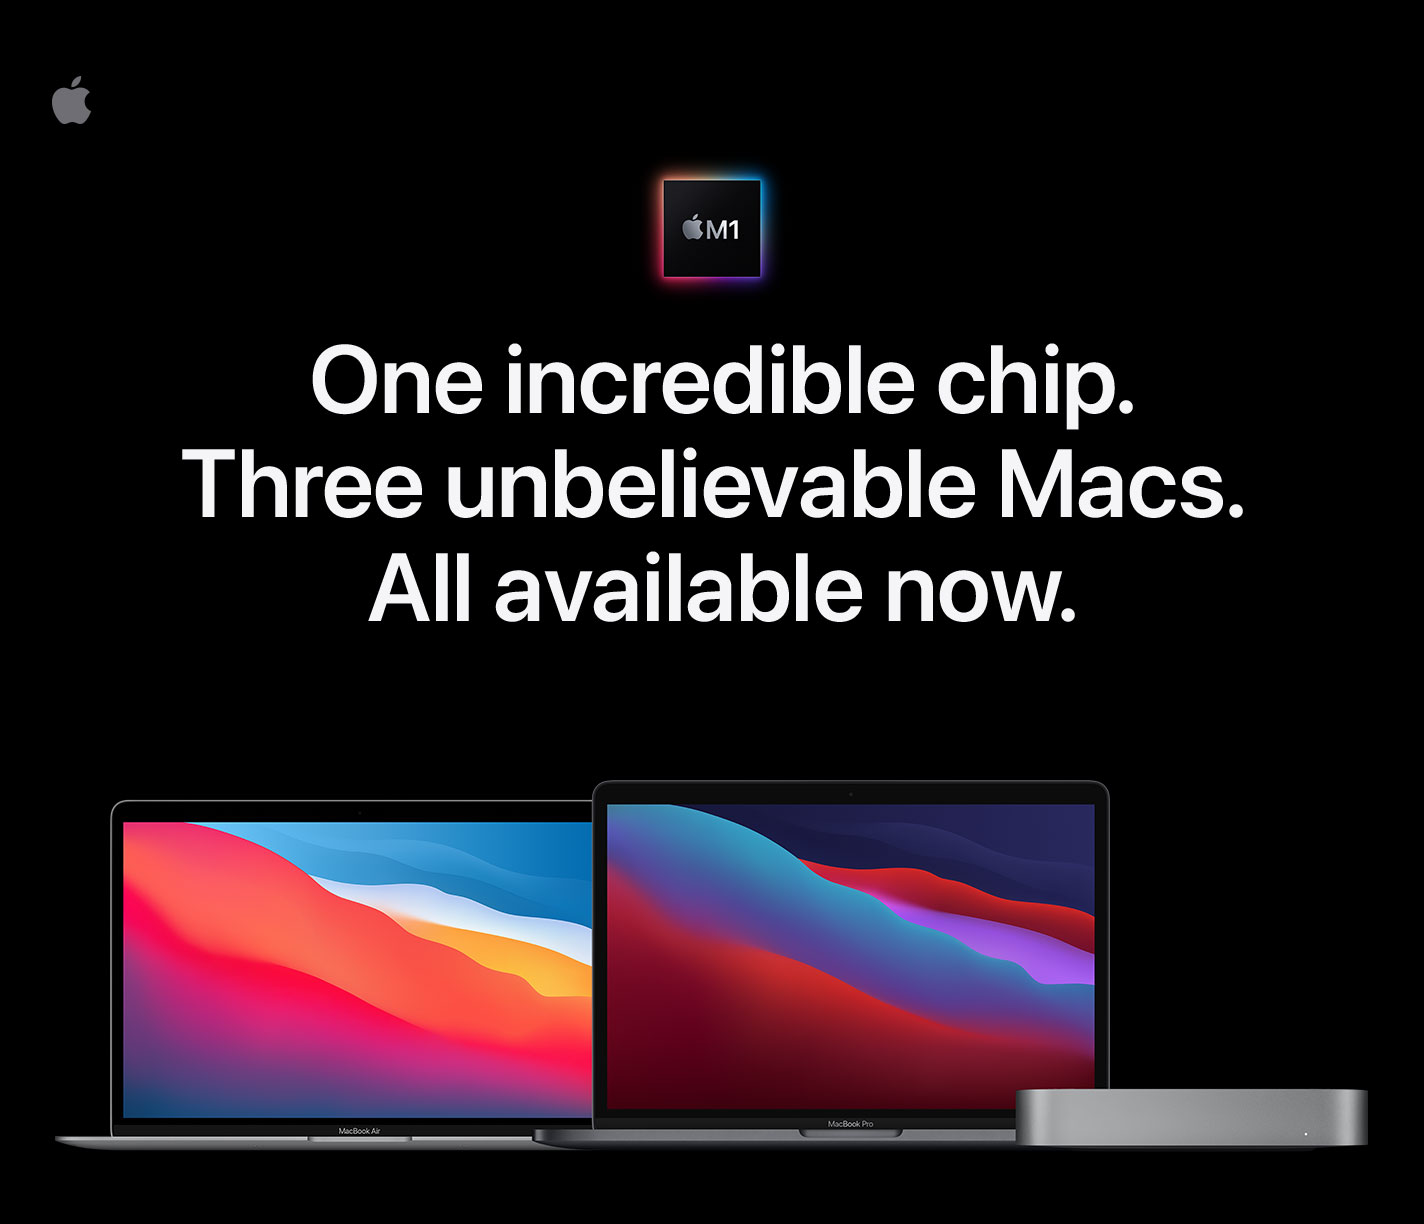 Apple M1. One incredible chip. Three unbelievable Macs. All available now.